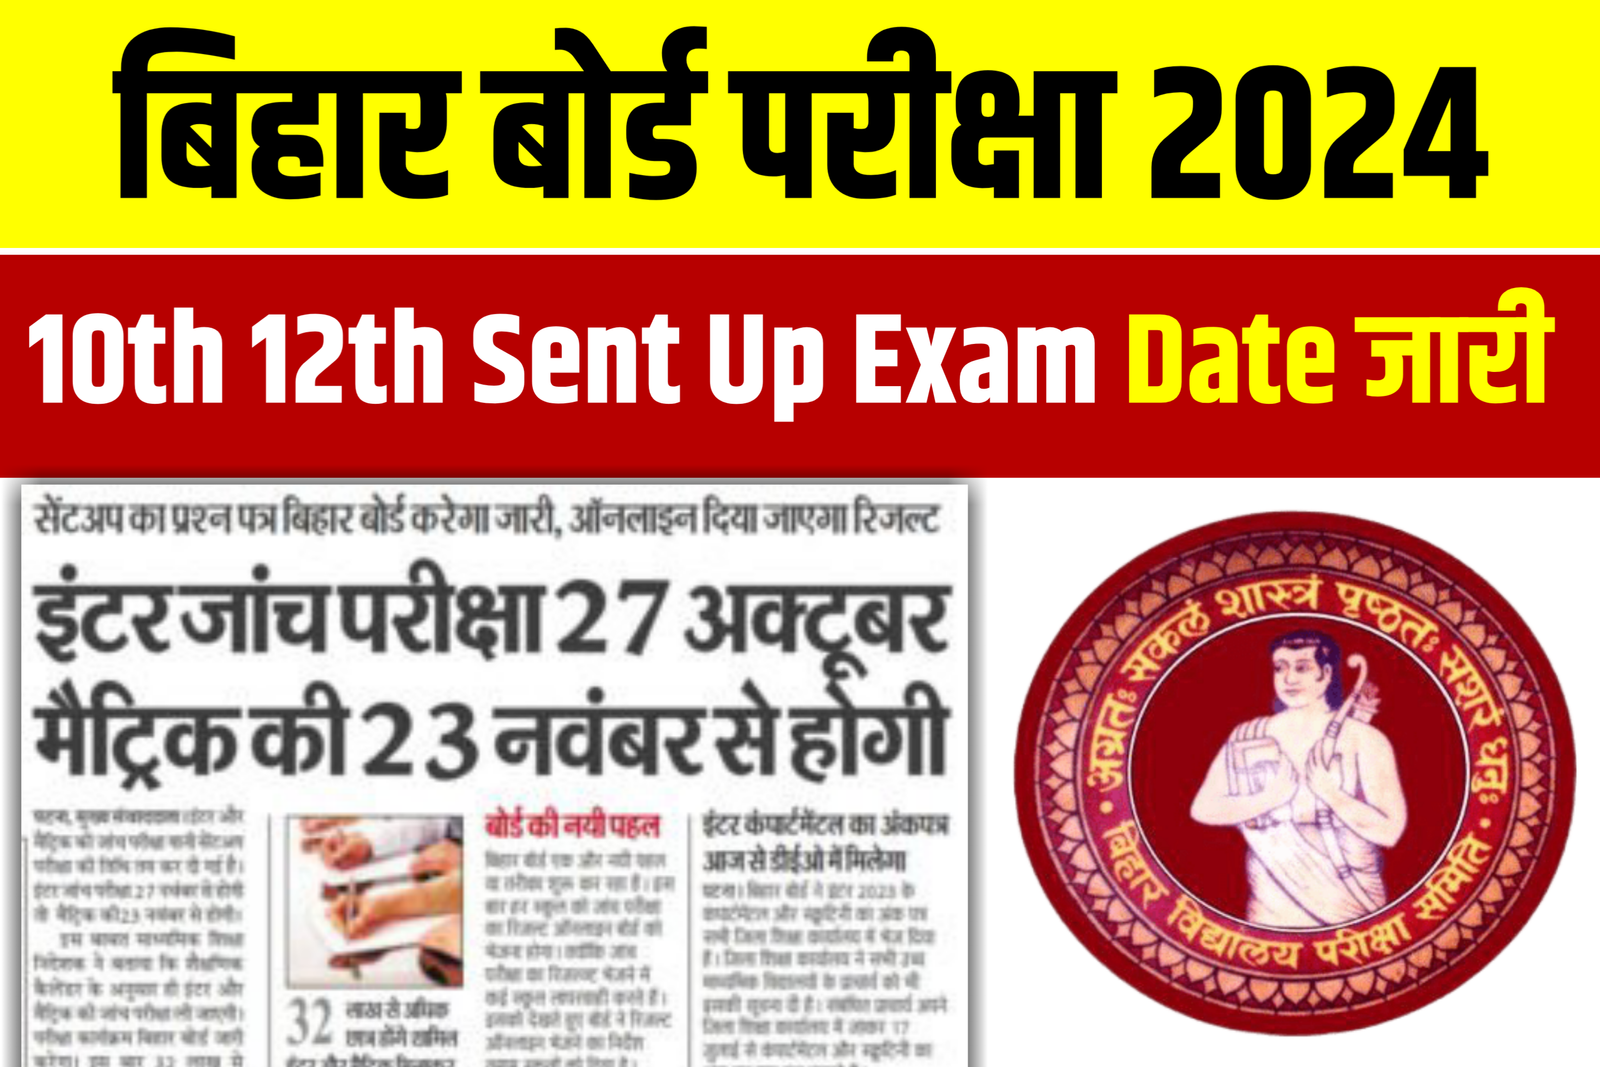 Bihar Board Matric Inter Sent Up Exam Date Out Today 2023: